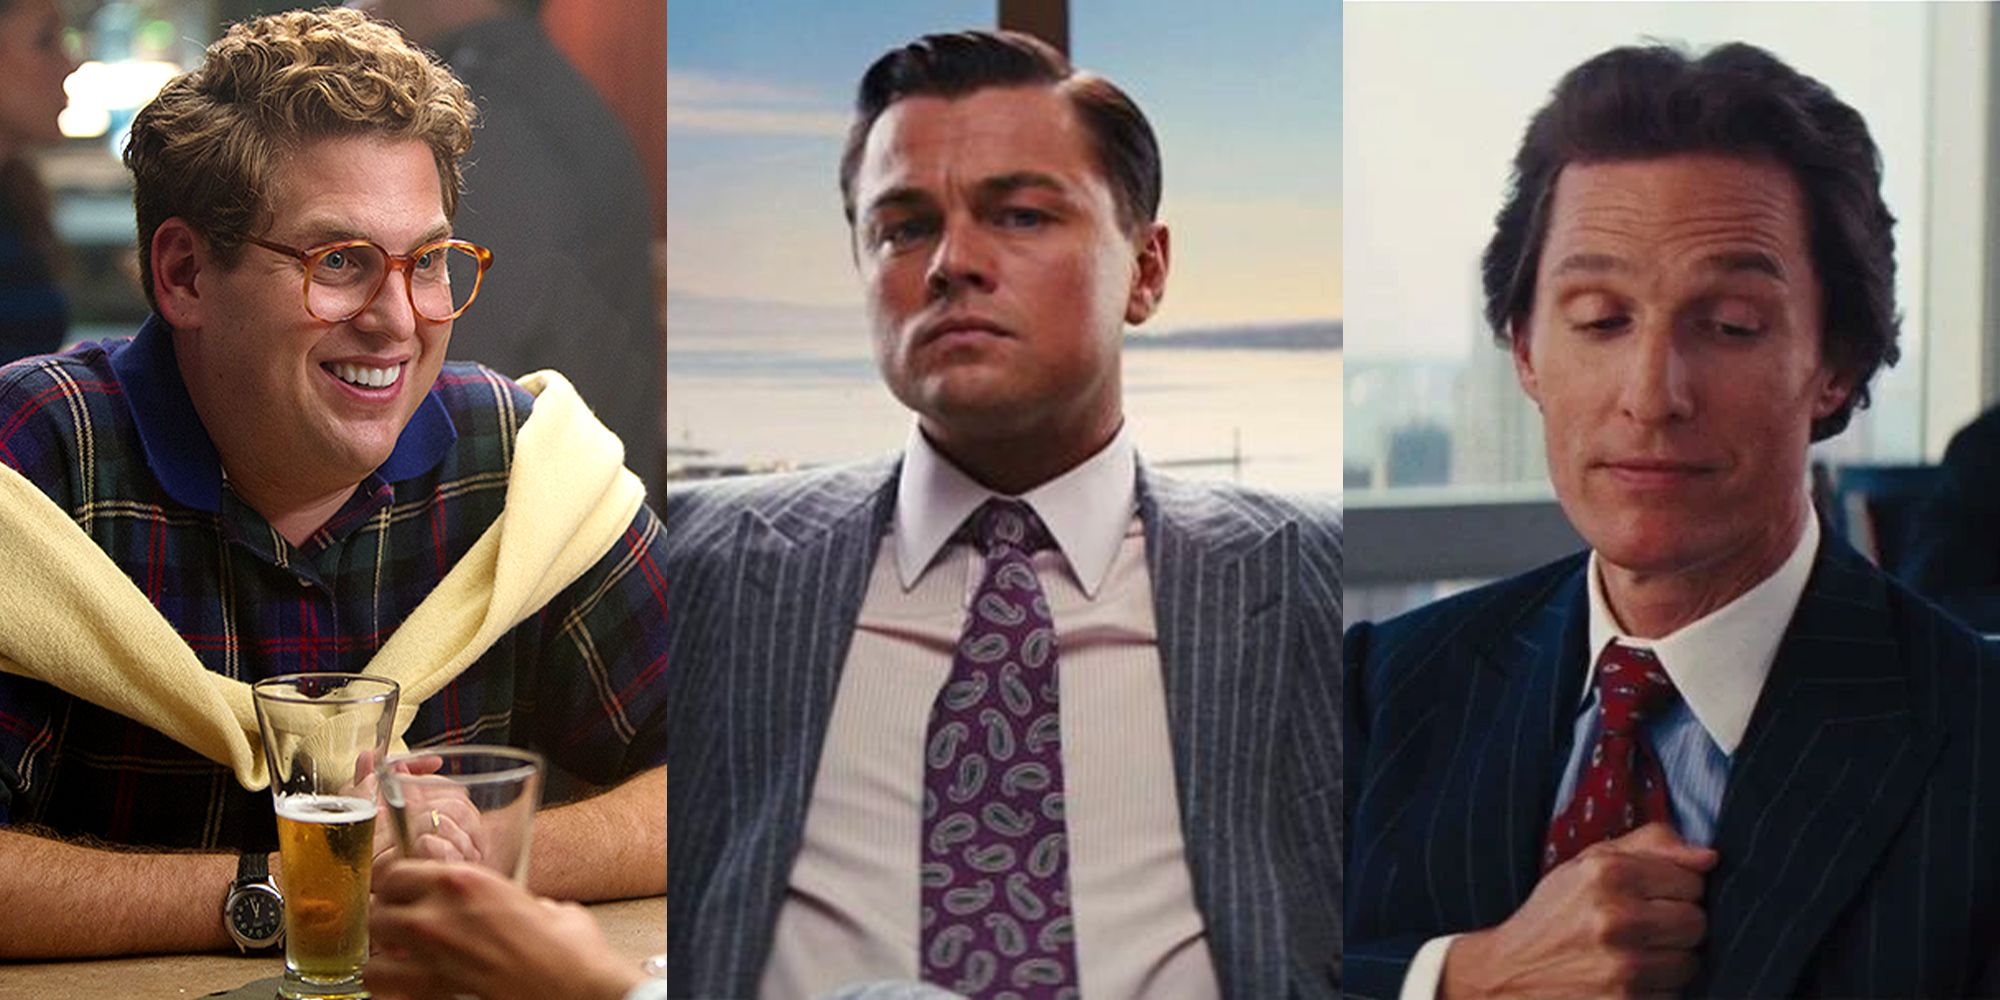 cast of the wolf of wall street